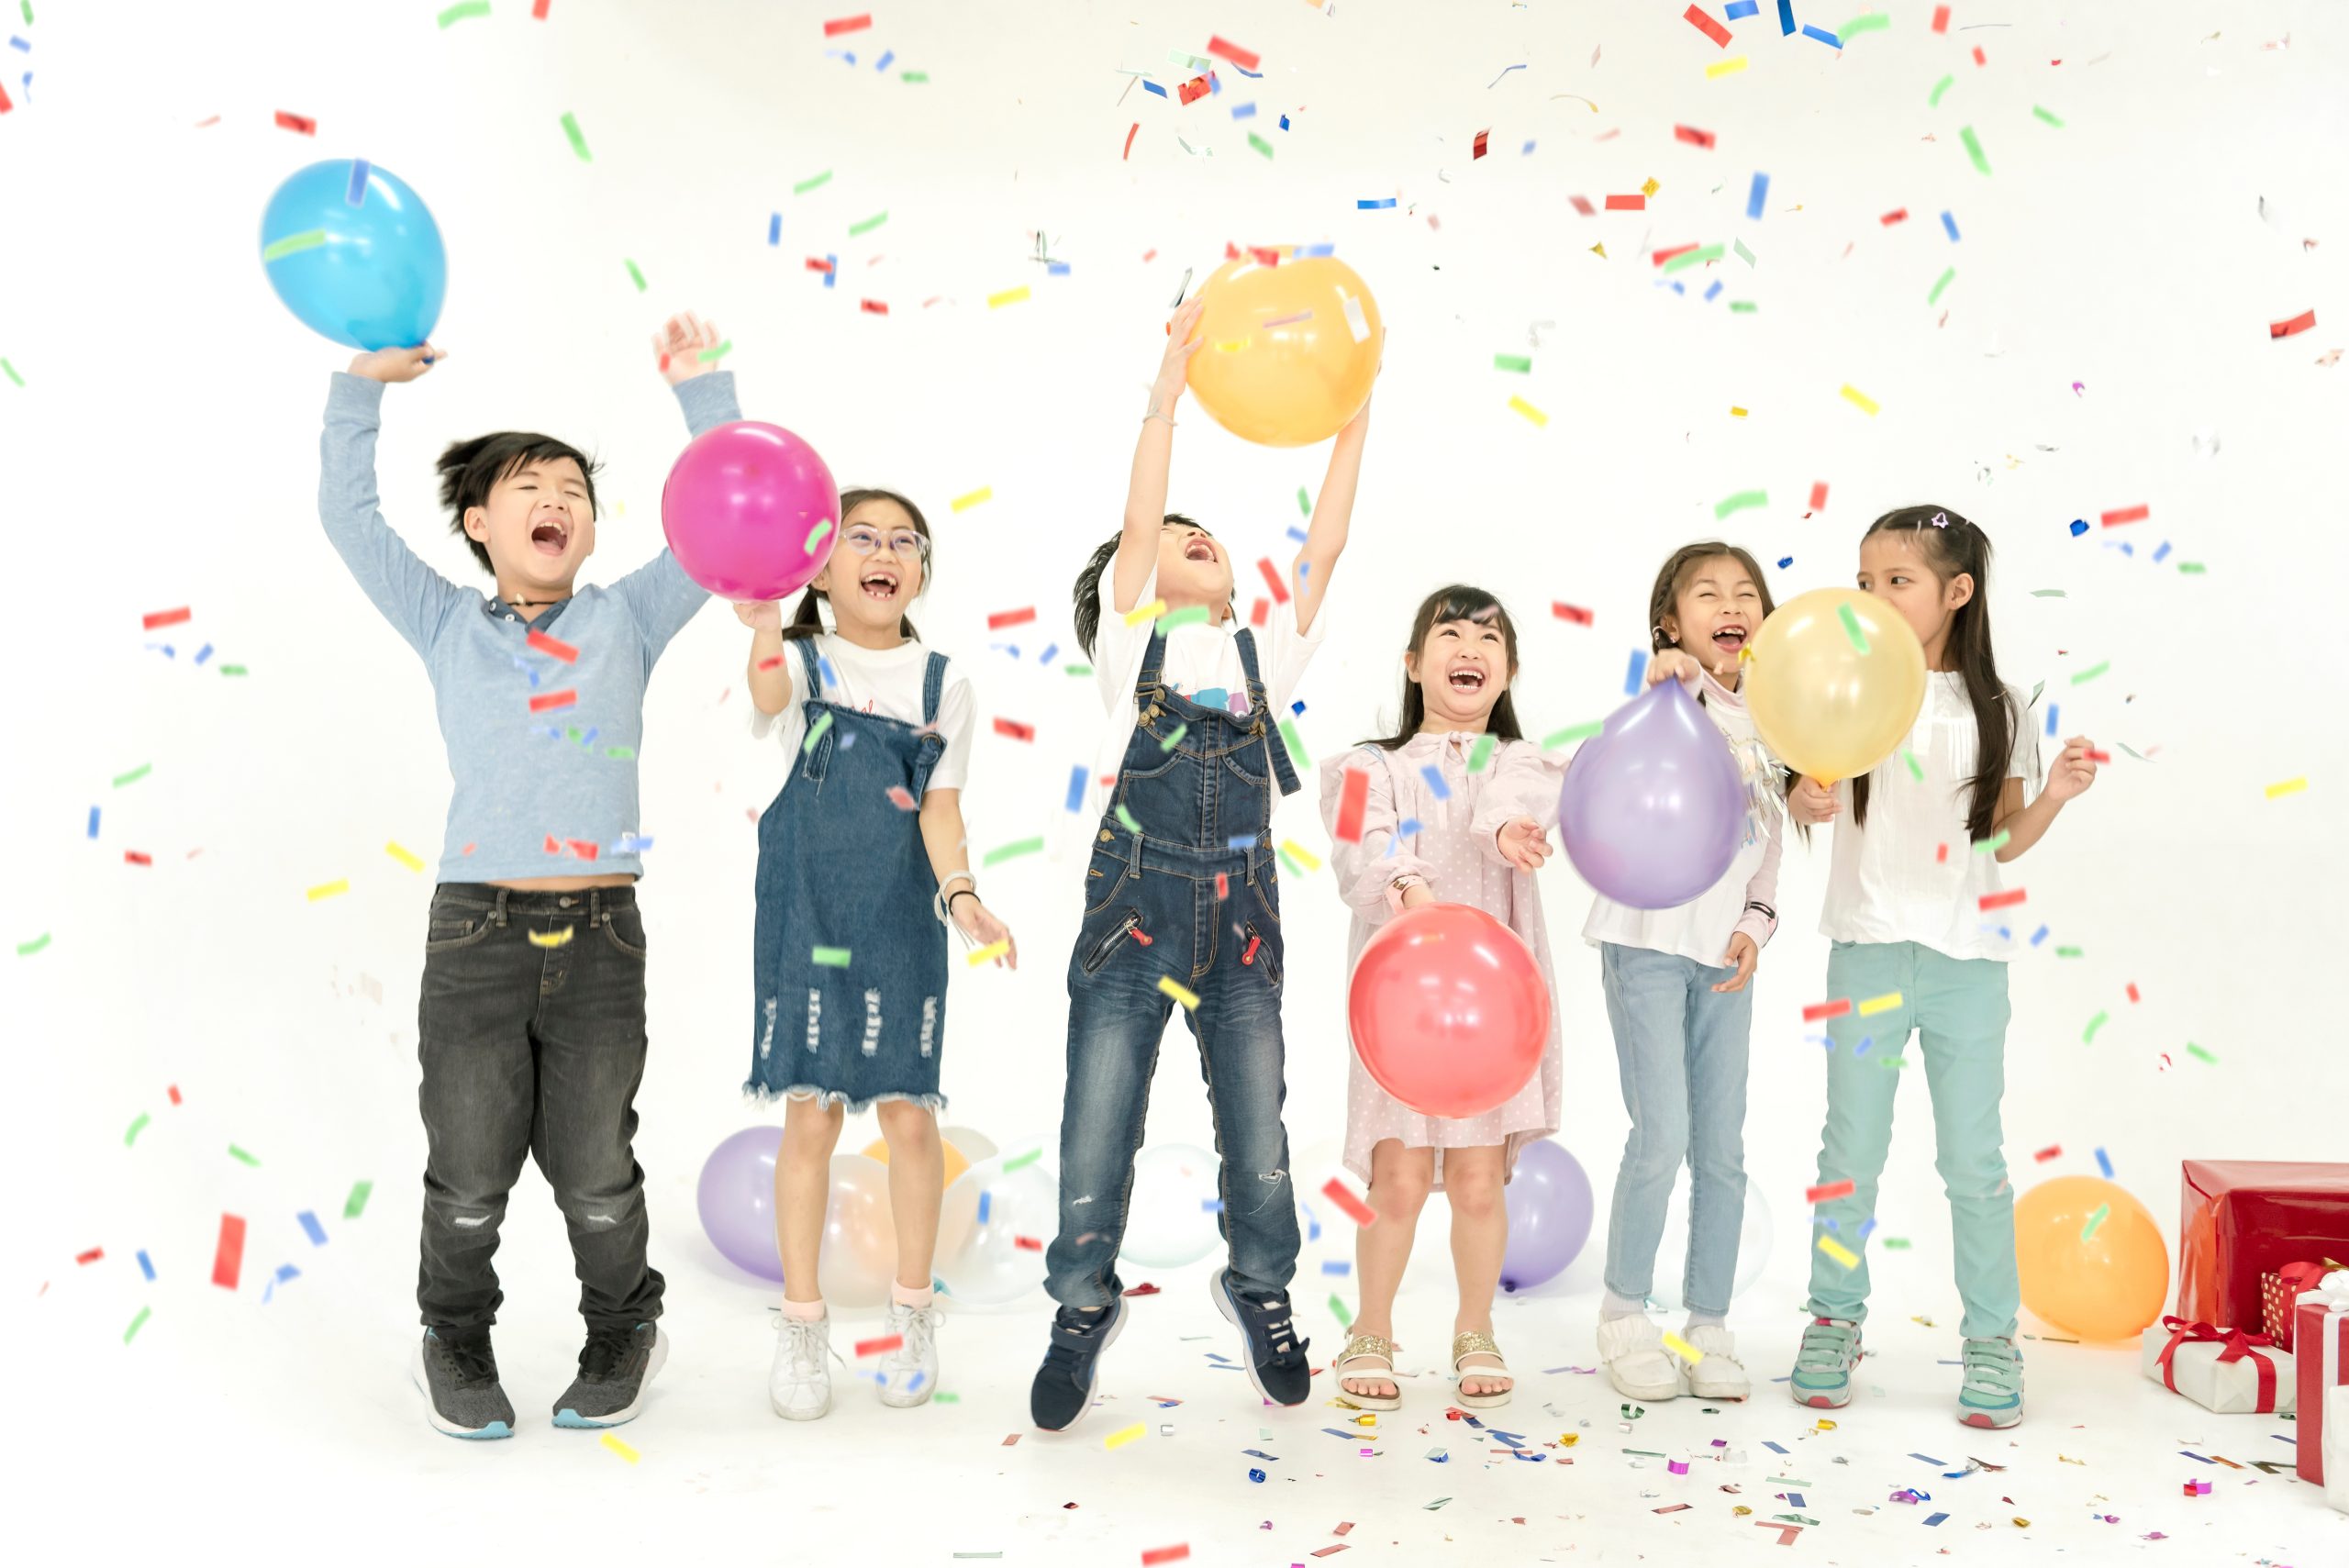 Group of Kids celebrating with balloons and confetti